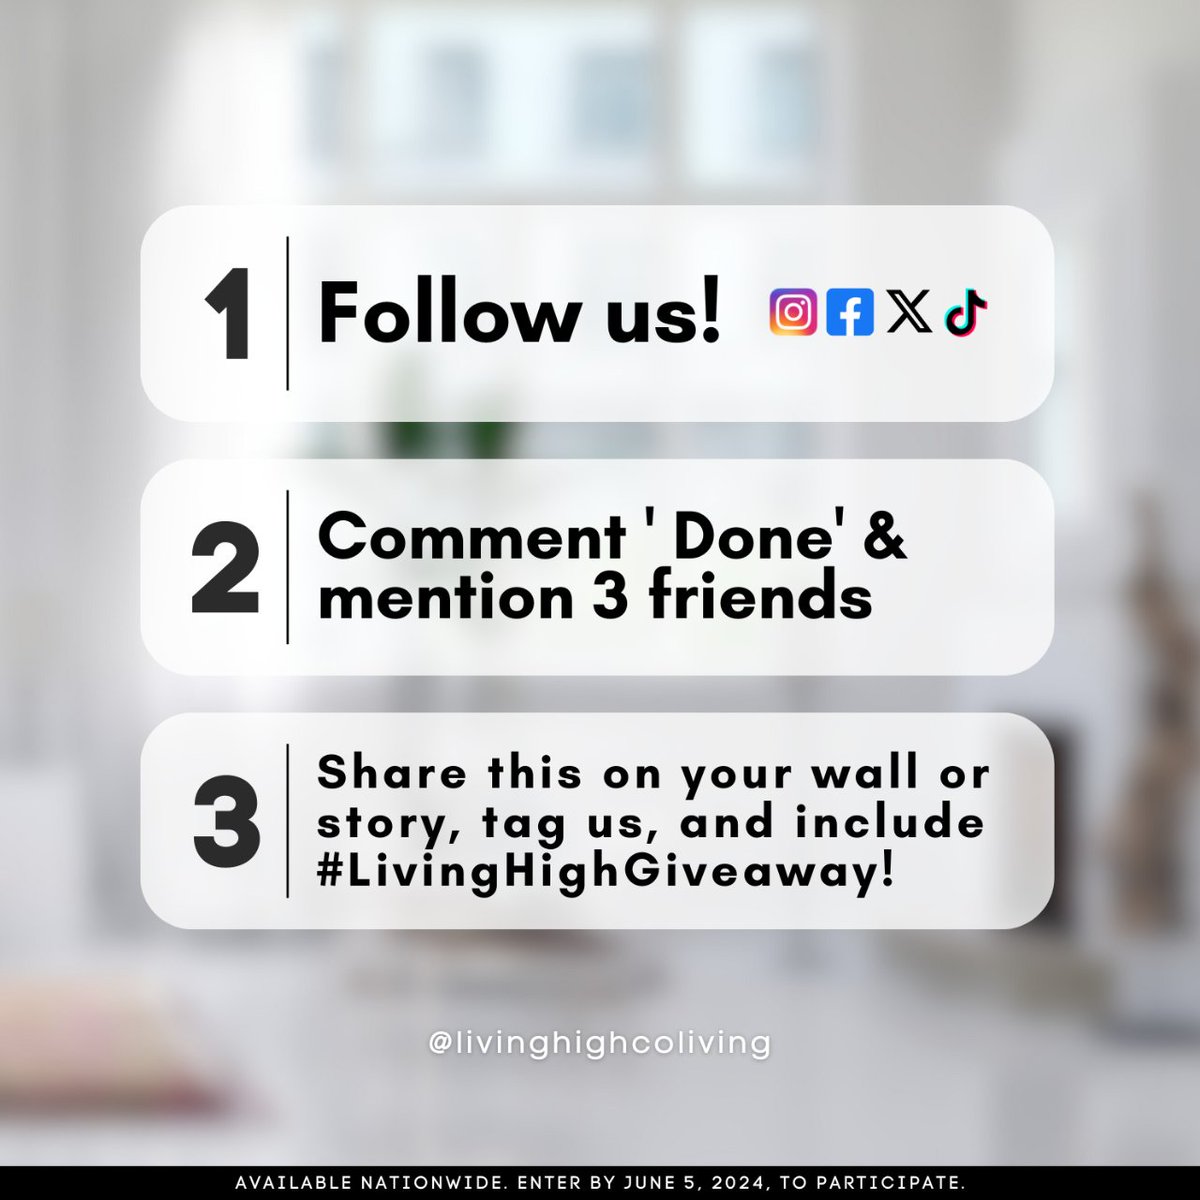 Join our giveaway contest at Living High and get a chance to earn $50!

#LivingHighGiveaway #WinWithUs #EarnWithLivingHigh #LivingHighContest2024 #50DollarGiveaway #HighLifeEntry #LivingHighNationwide